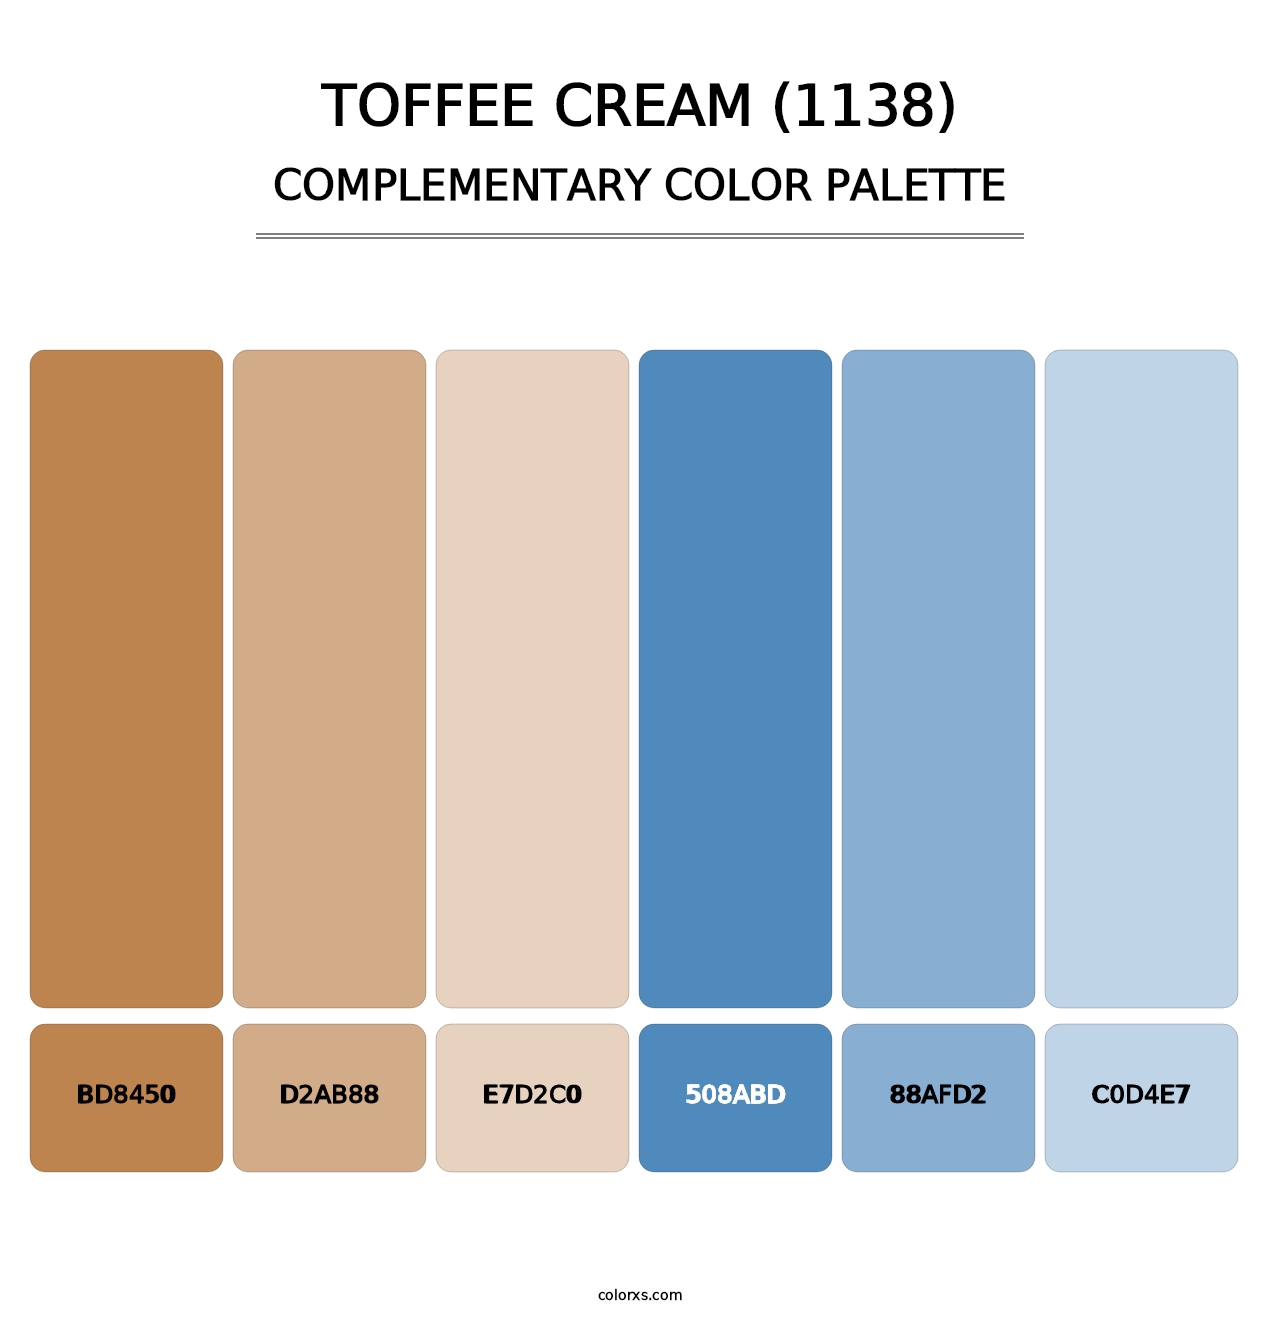 Toffee Cream (1138) - Complementary Color Palette